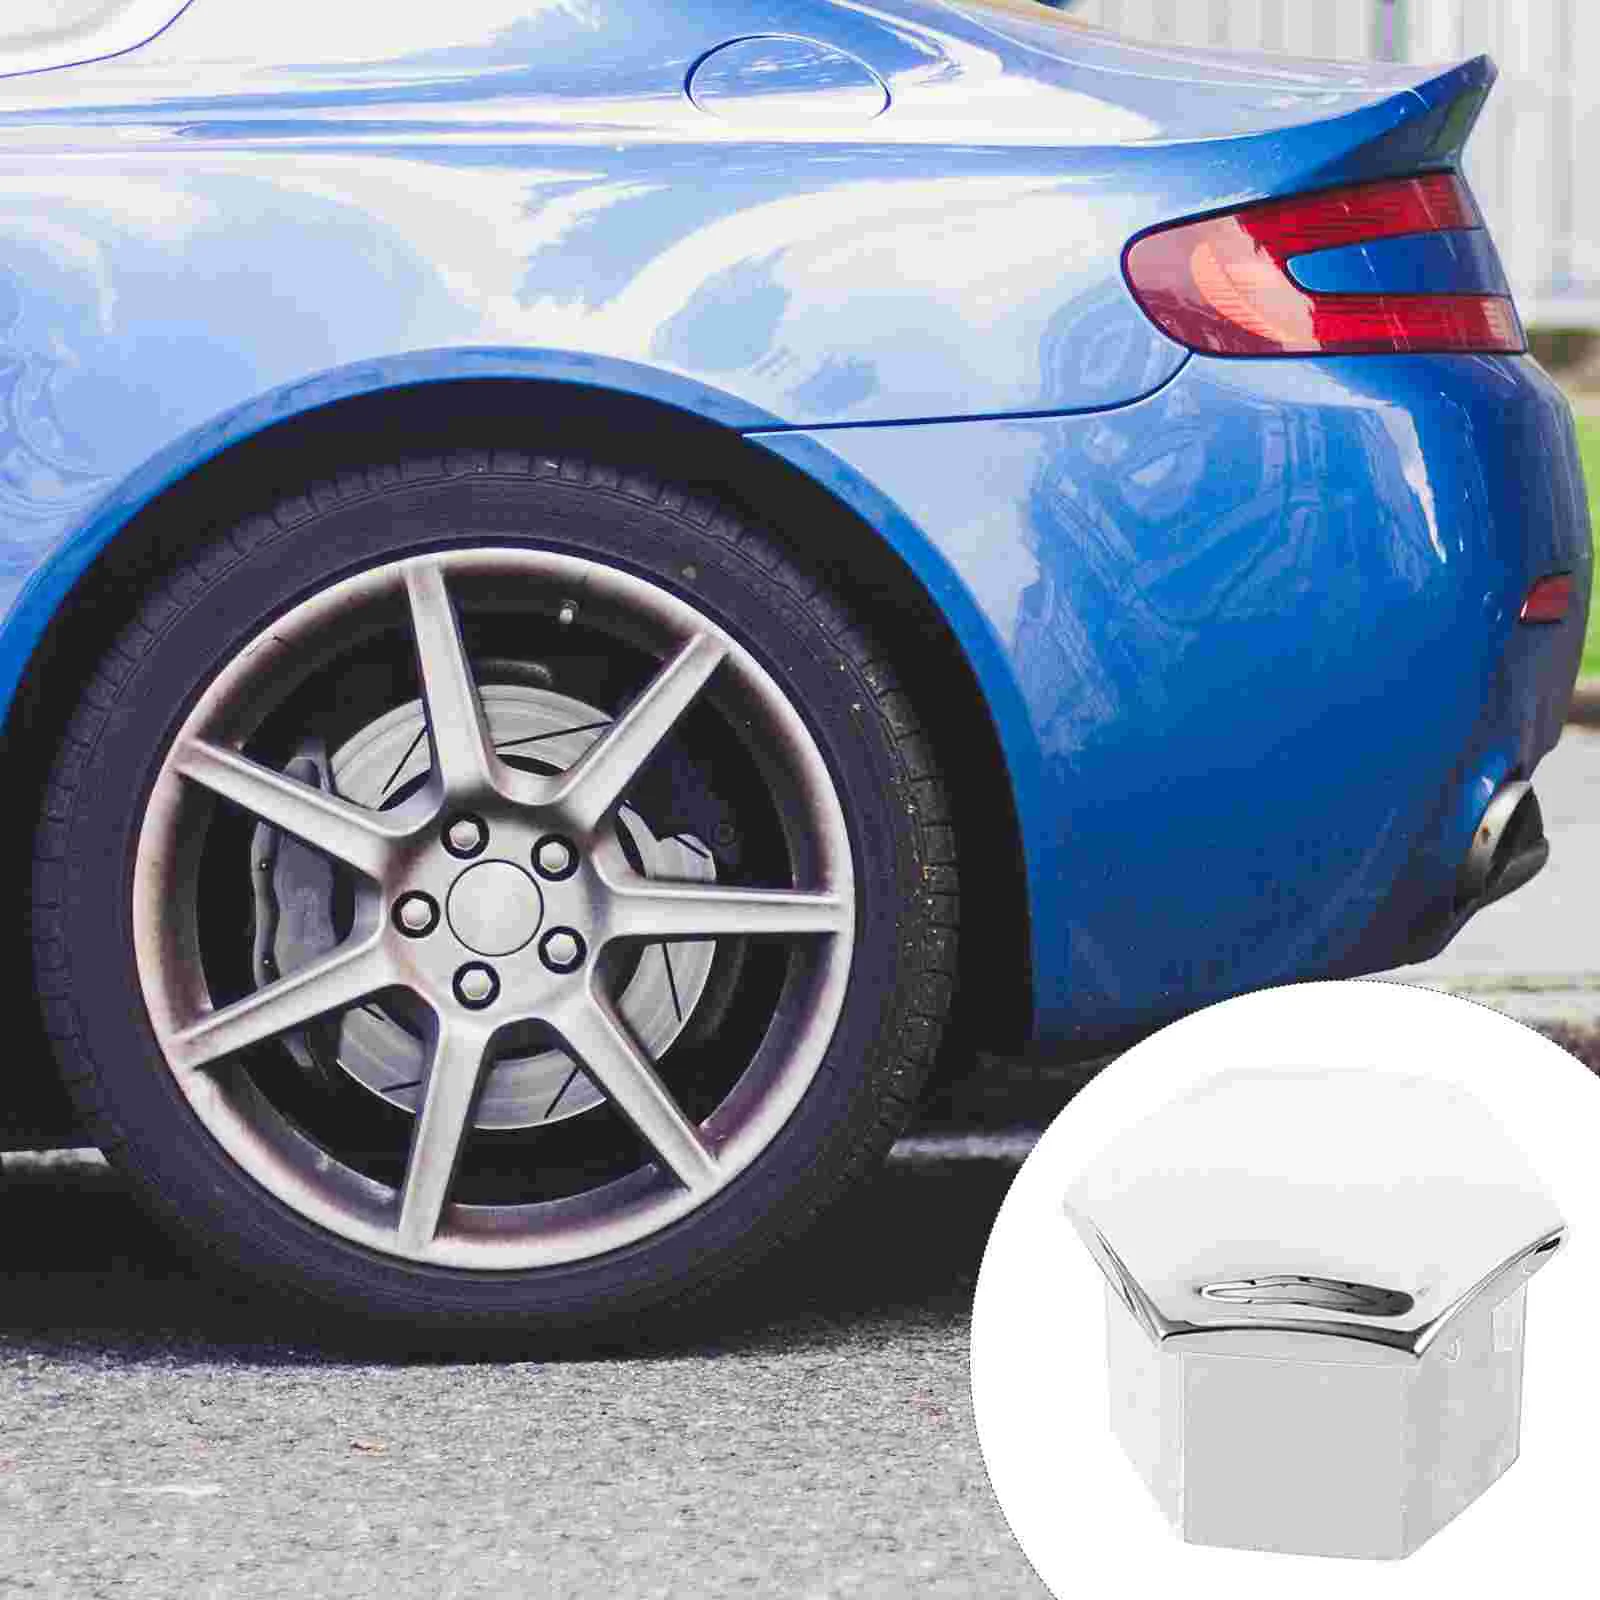 

20Pcs Hexagonal Wheel Lug Nut Covers Bolts Covers Screw Protect Caps for 307 308 408 206 207 C5 (Silver) Nuts